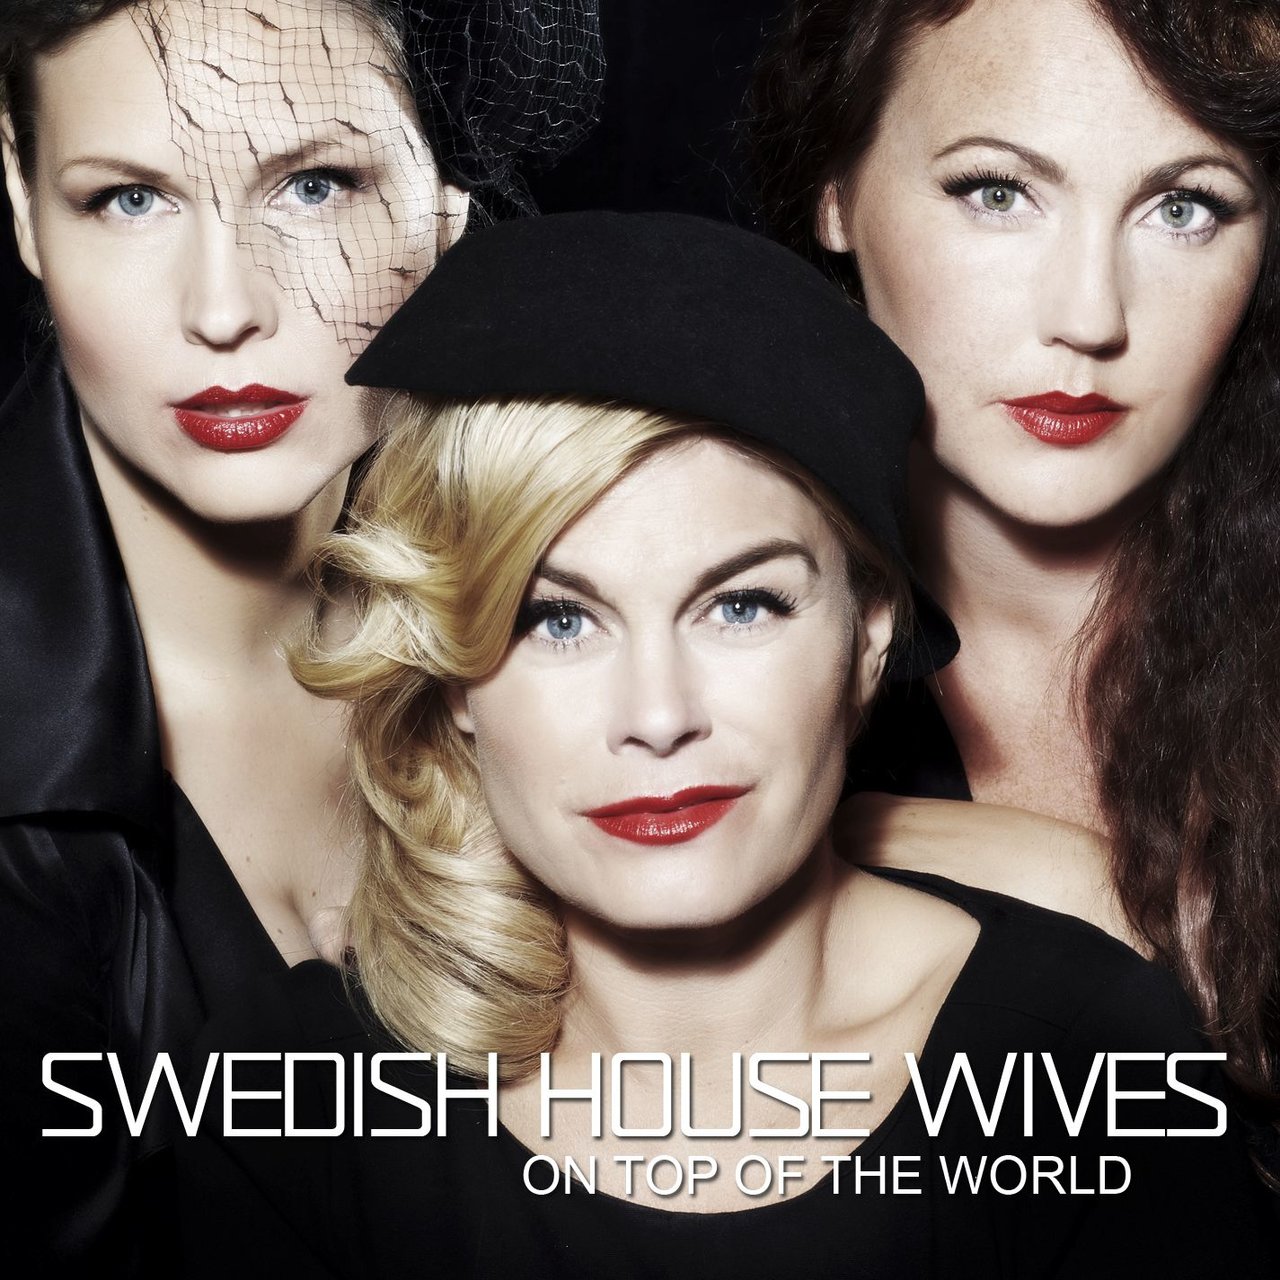 Swedish House Wives — On Top of the World cover artwork